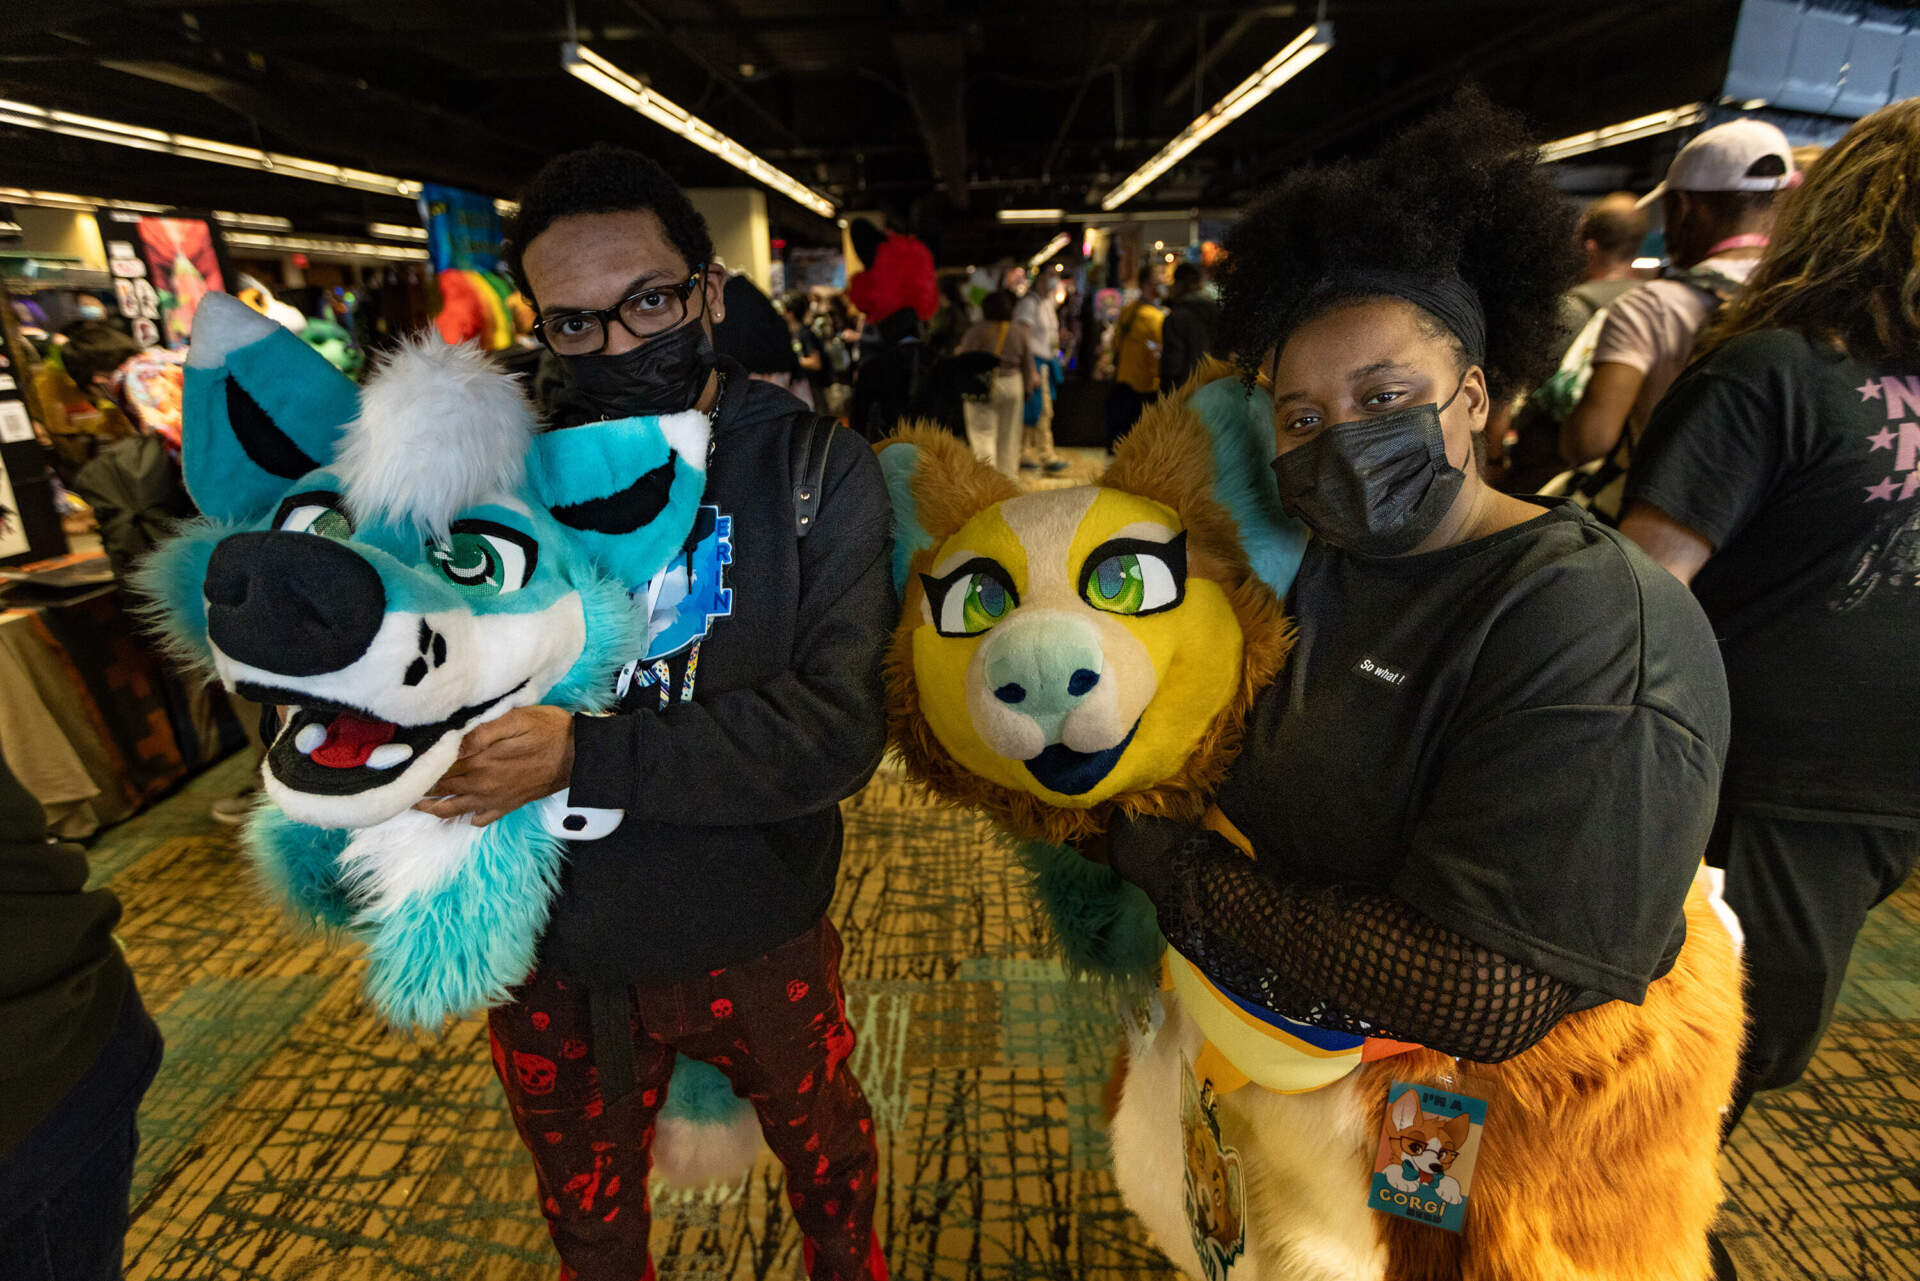 Khalil Reid, a.k.a. Erin, a Brooklyn fox and Moon, a corgi from New Jersey, pose without their costume heads in Vendor Hall at the Anthro New England conference. (Jesse Costa/WBUR)